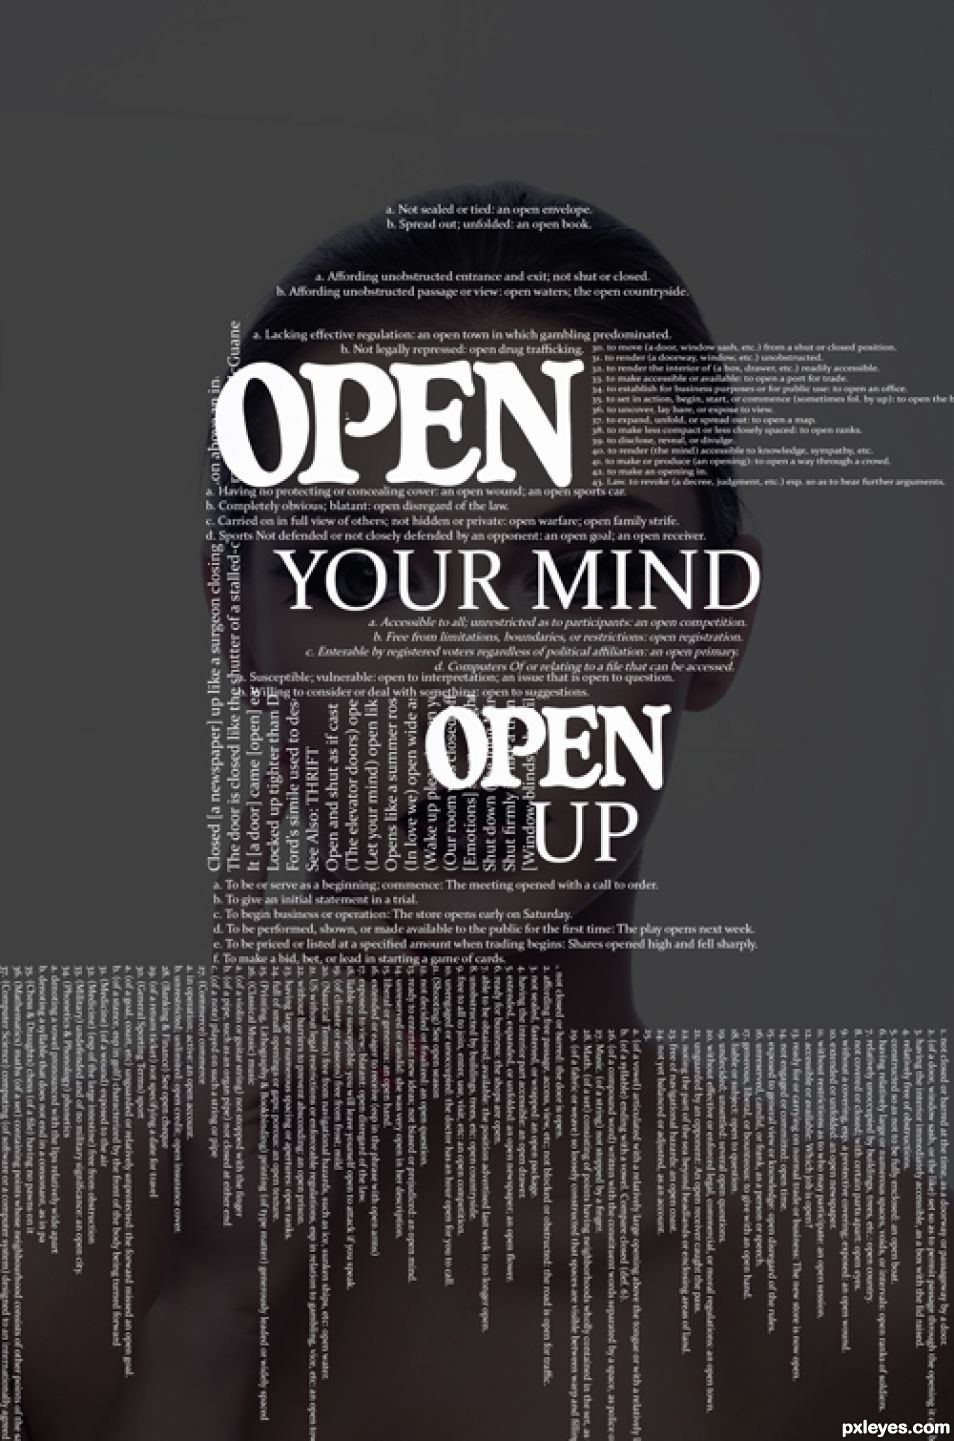 Creation of Open your mind: Step 4